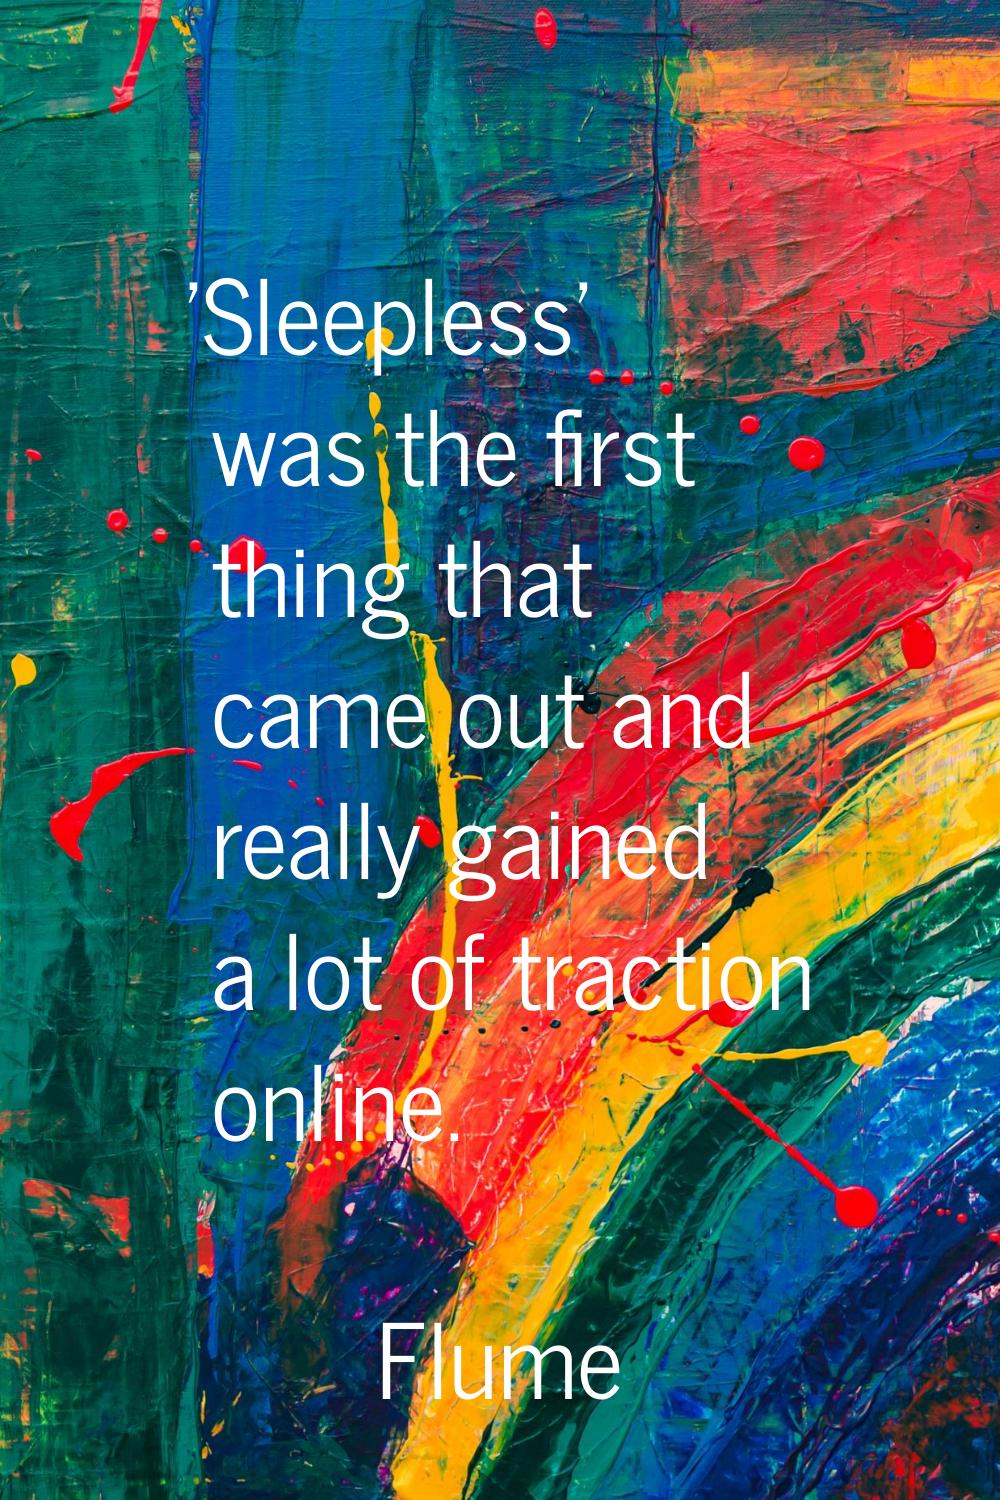 'Sleepless' was the first thing that came out and really gained a lot of traction online.